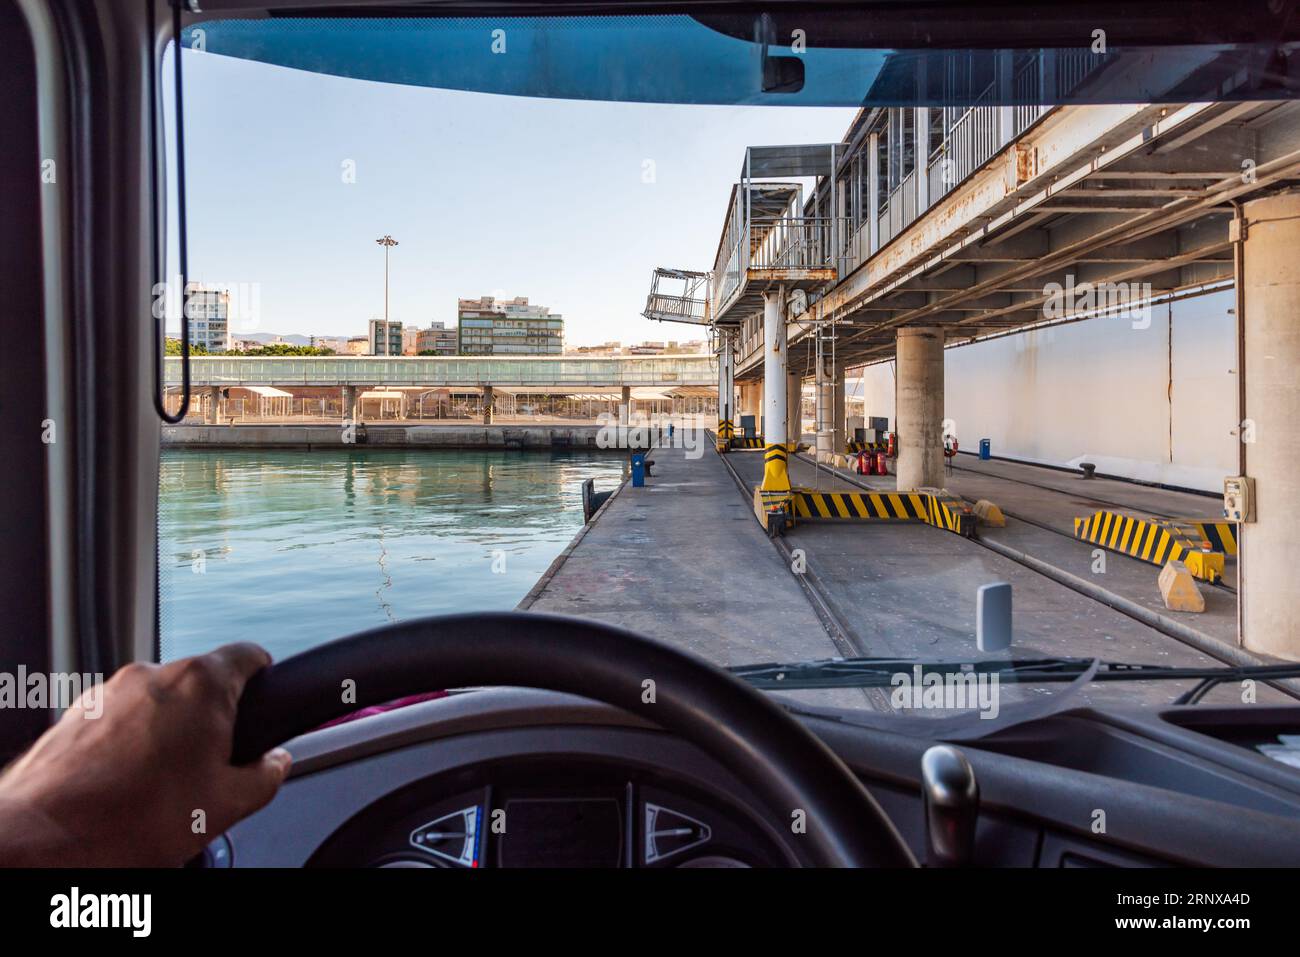 Truck leaving a dock in the port with the complications of the narrowness of the place. Stock Photo